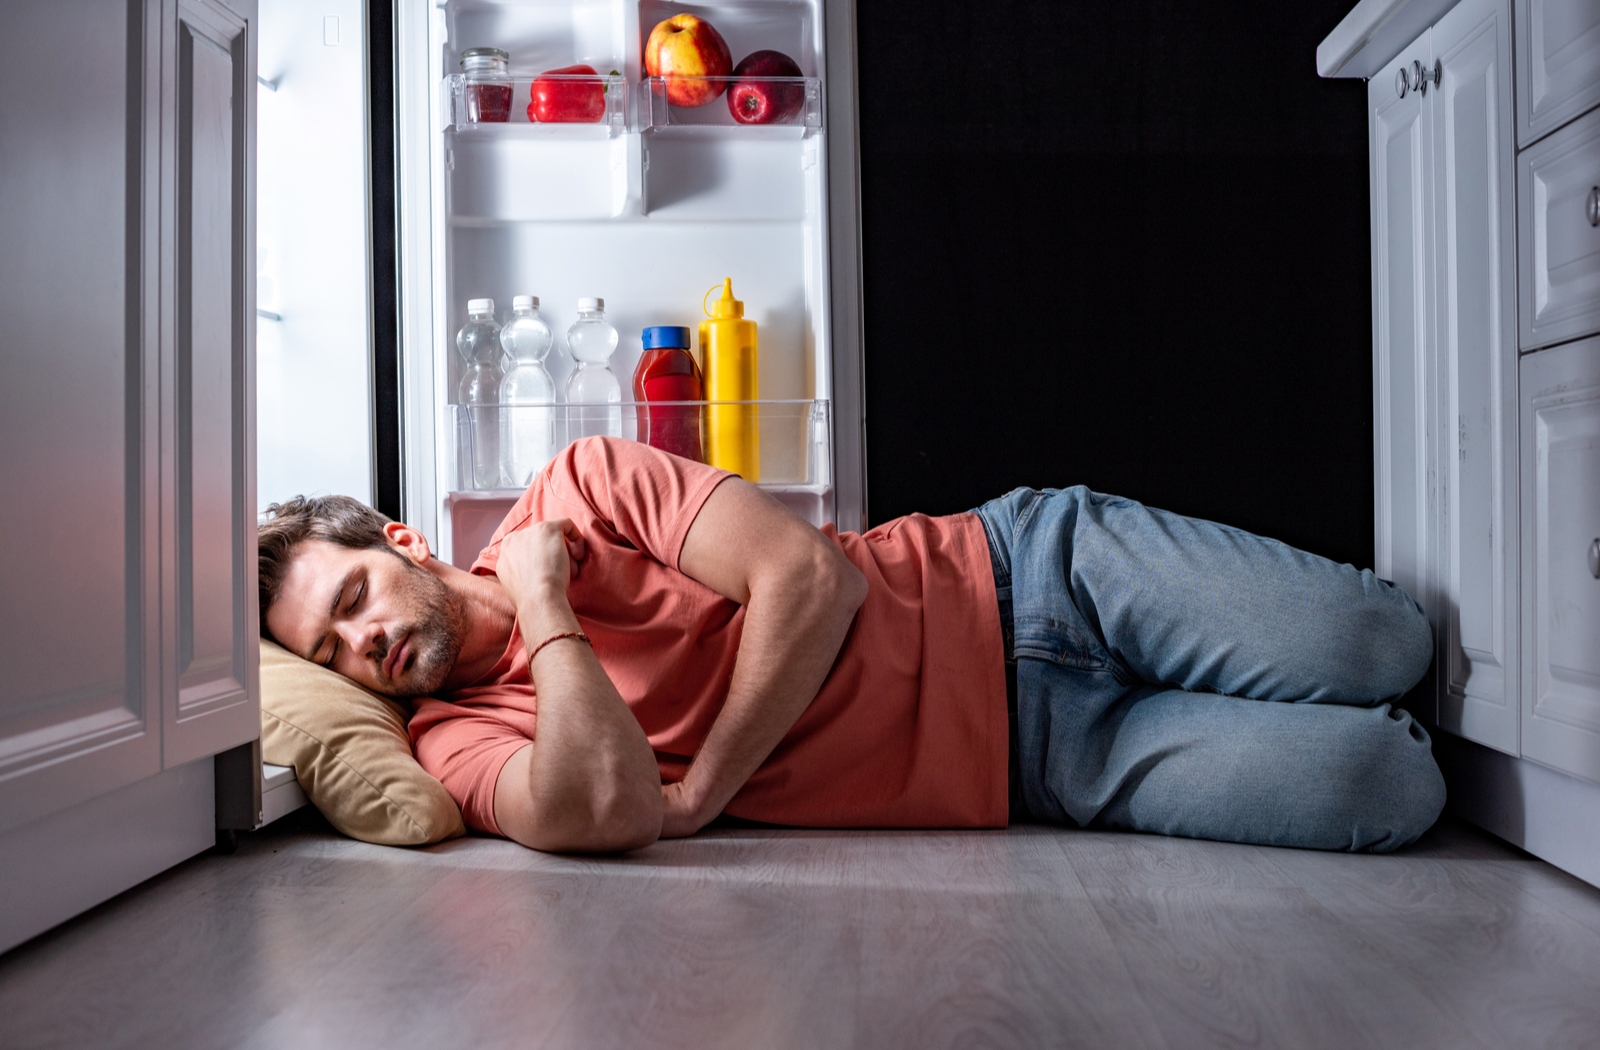 Man sleeping on the floor in the kitchen in front of an open refrigerator because his house is too warm to sleep in the summer